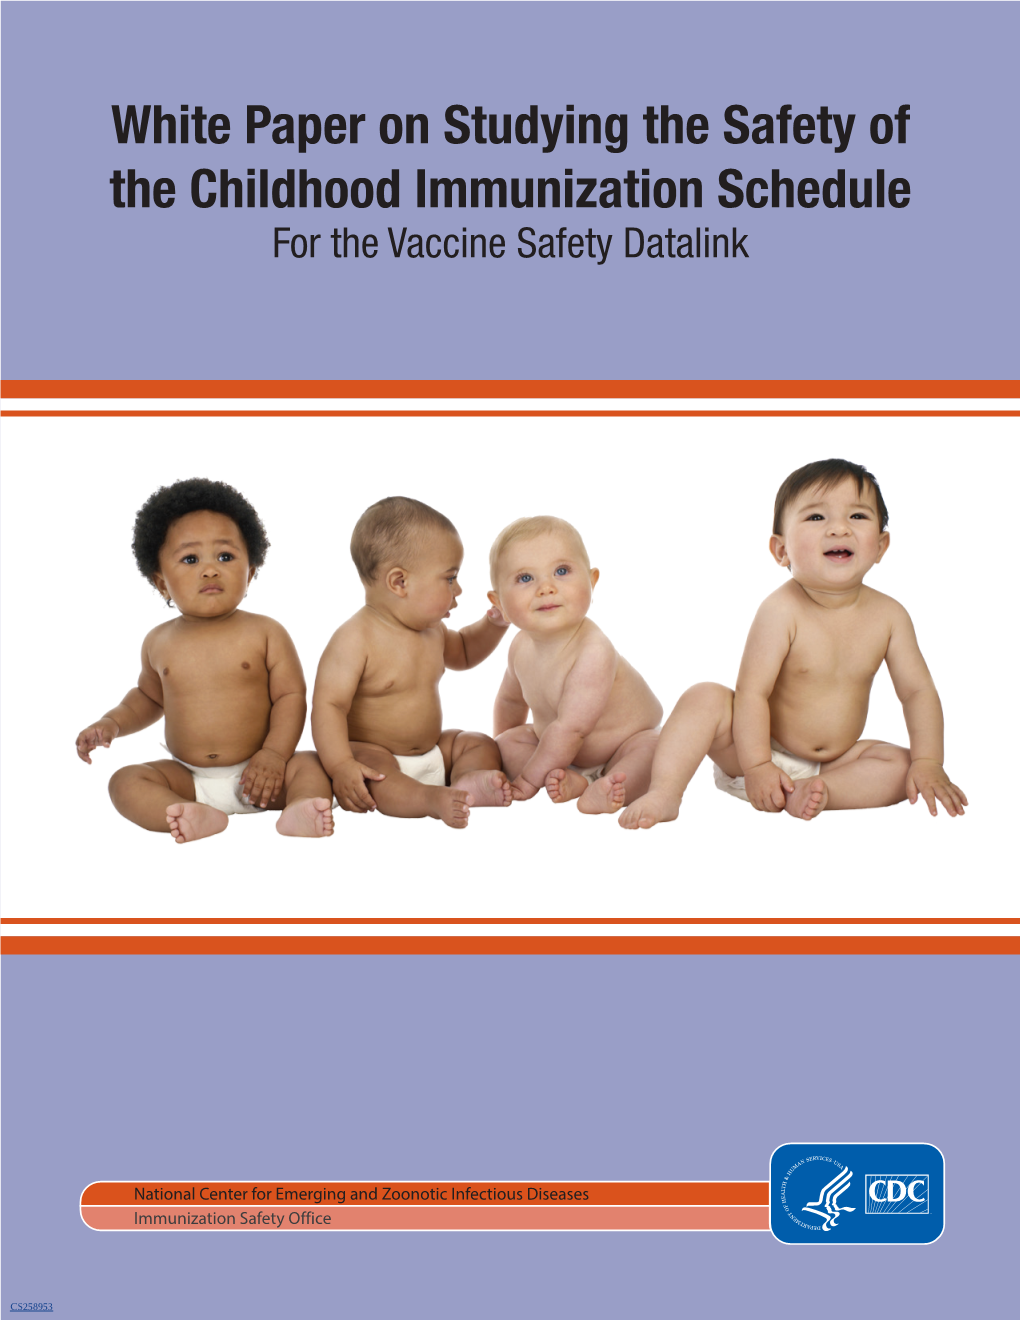 White Paper on Studying the Safety of the Childhood Immunization Schedule for the Vaccine Safety Datalink